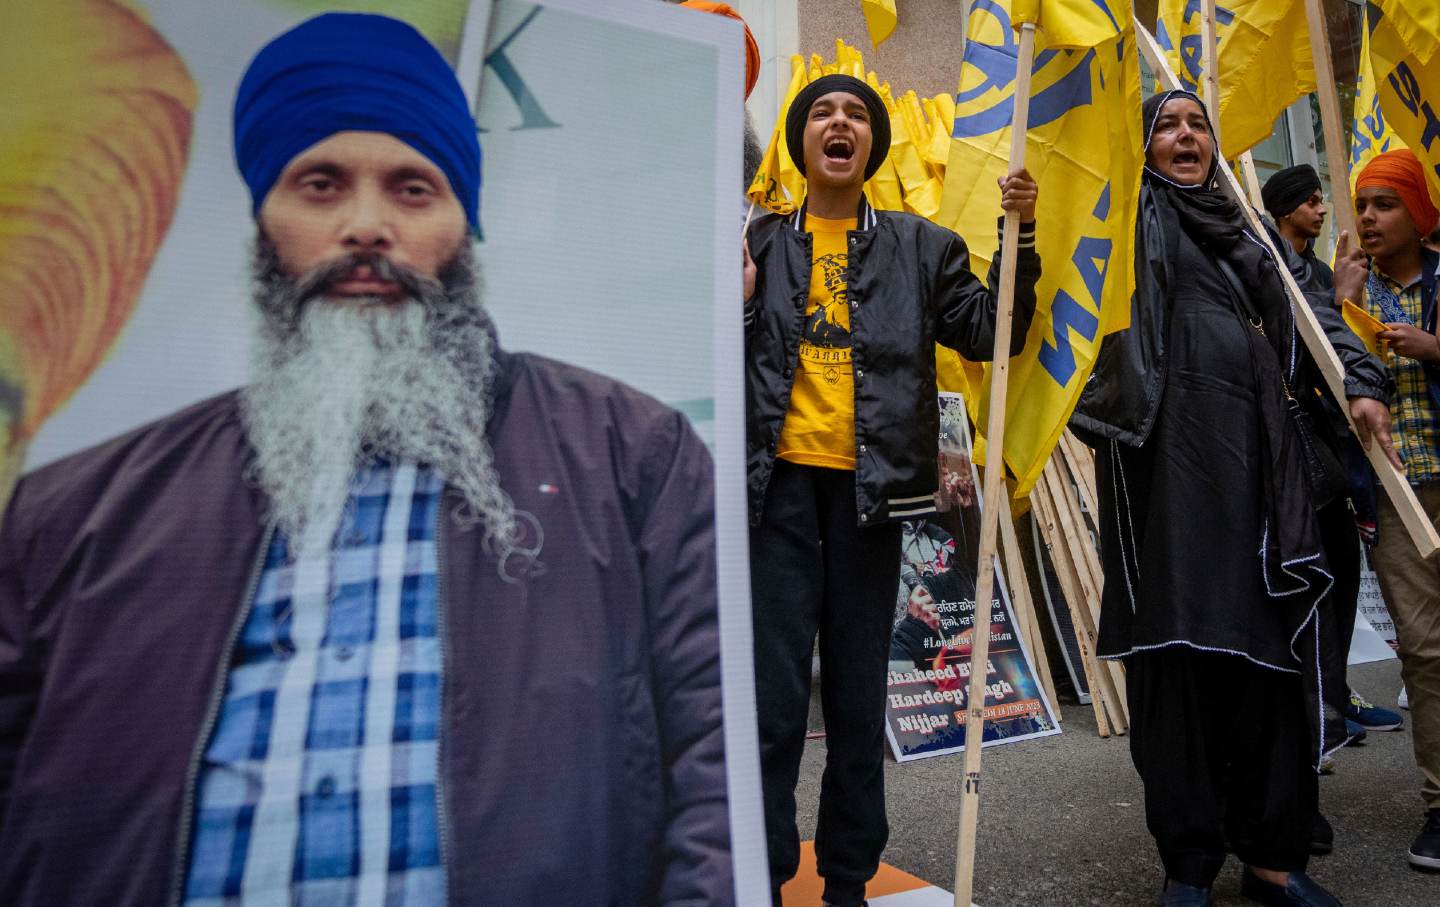 Protesters chant after the death of Hardeep Singh Nijjar, with a photo of SIngh Nijjar on the left